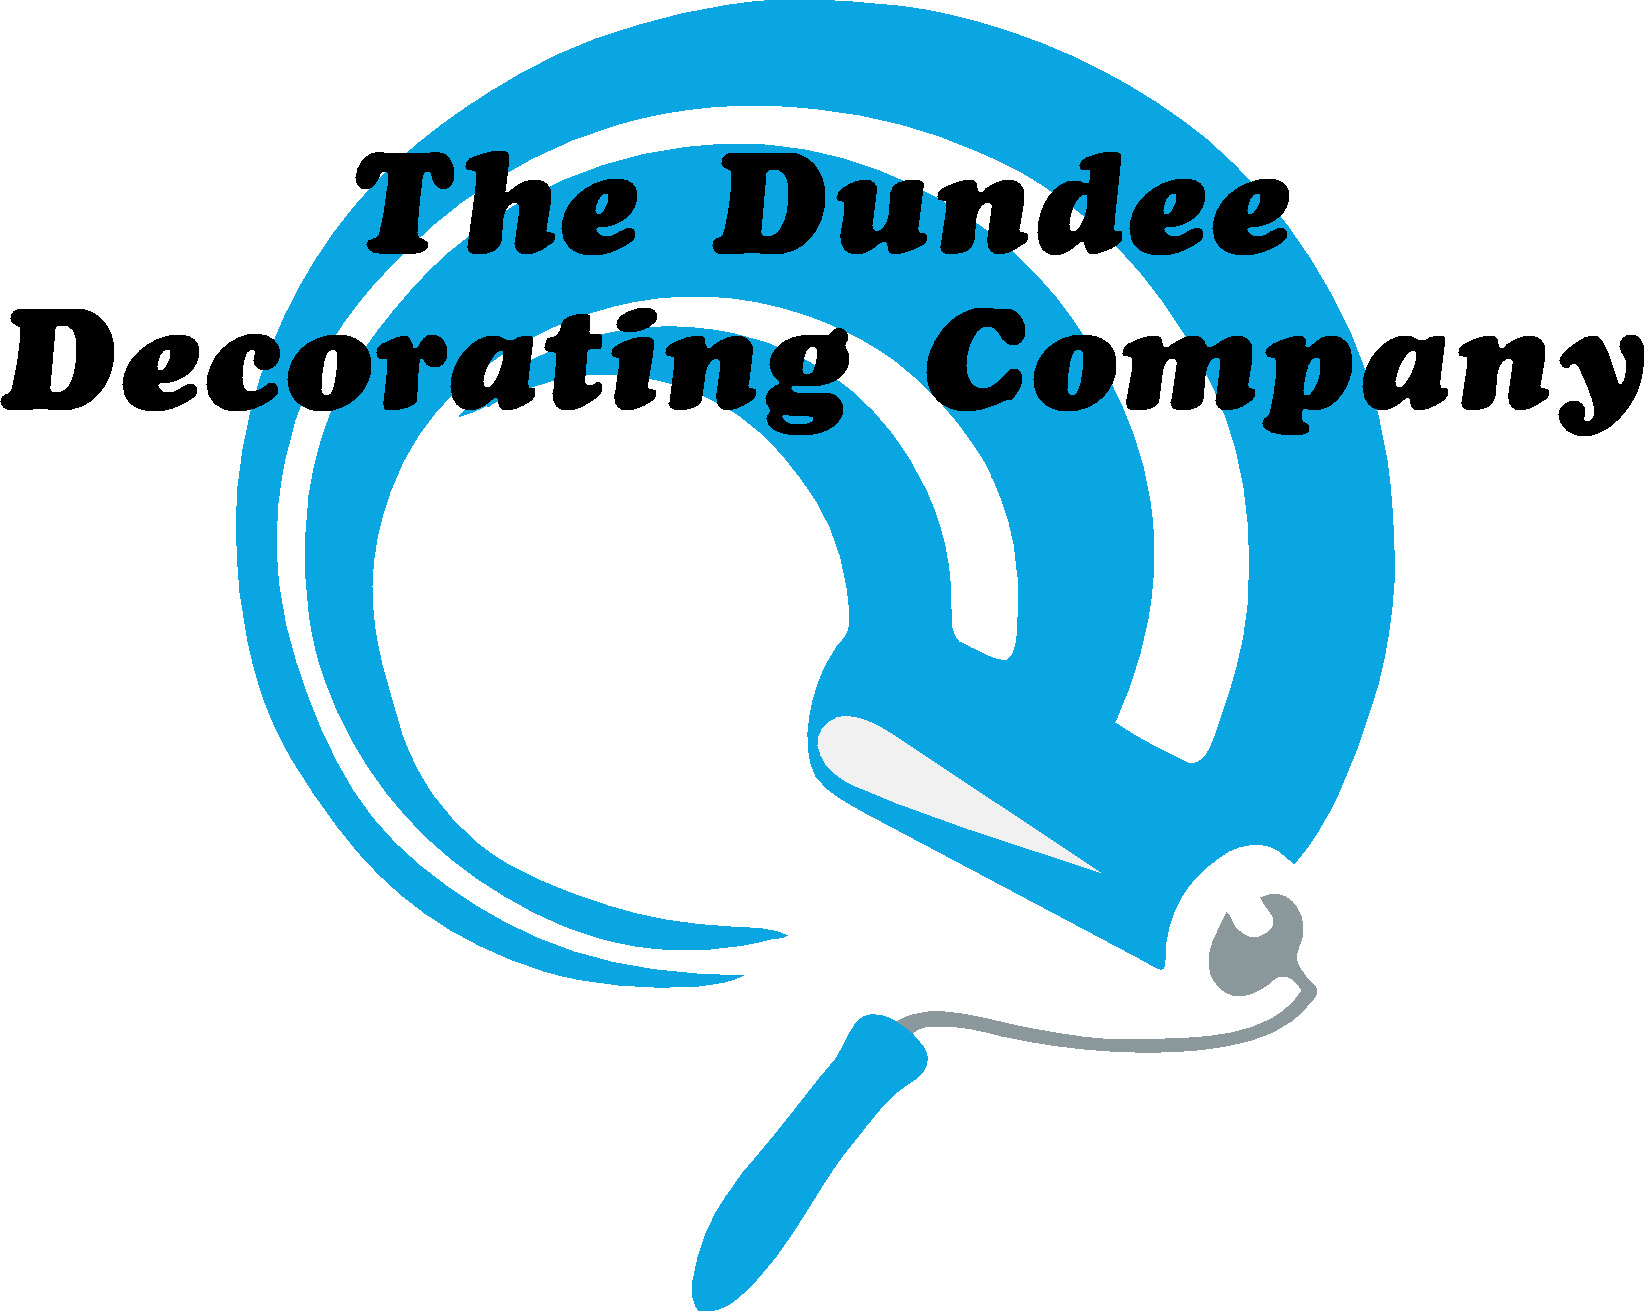 THE DUNDEE DECORATING COMPANY